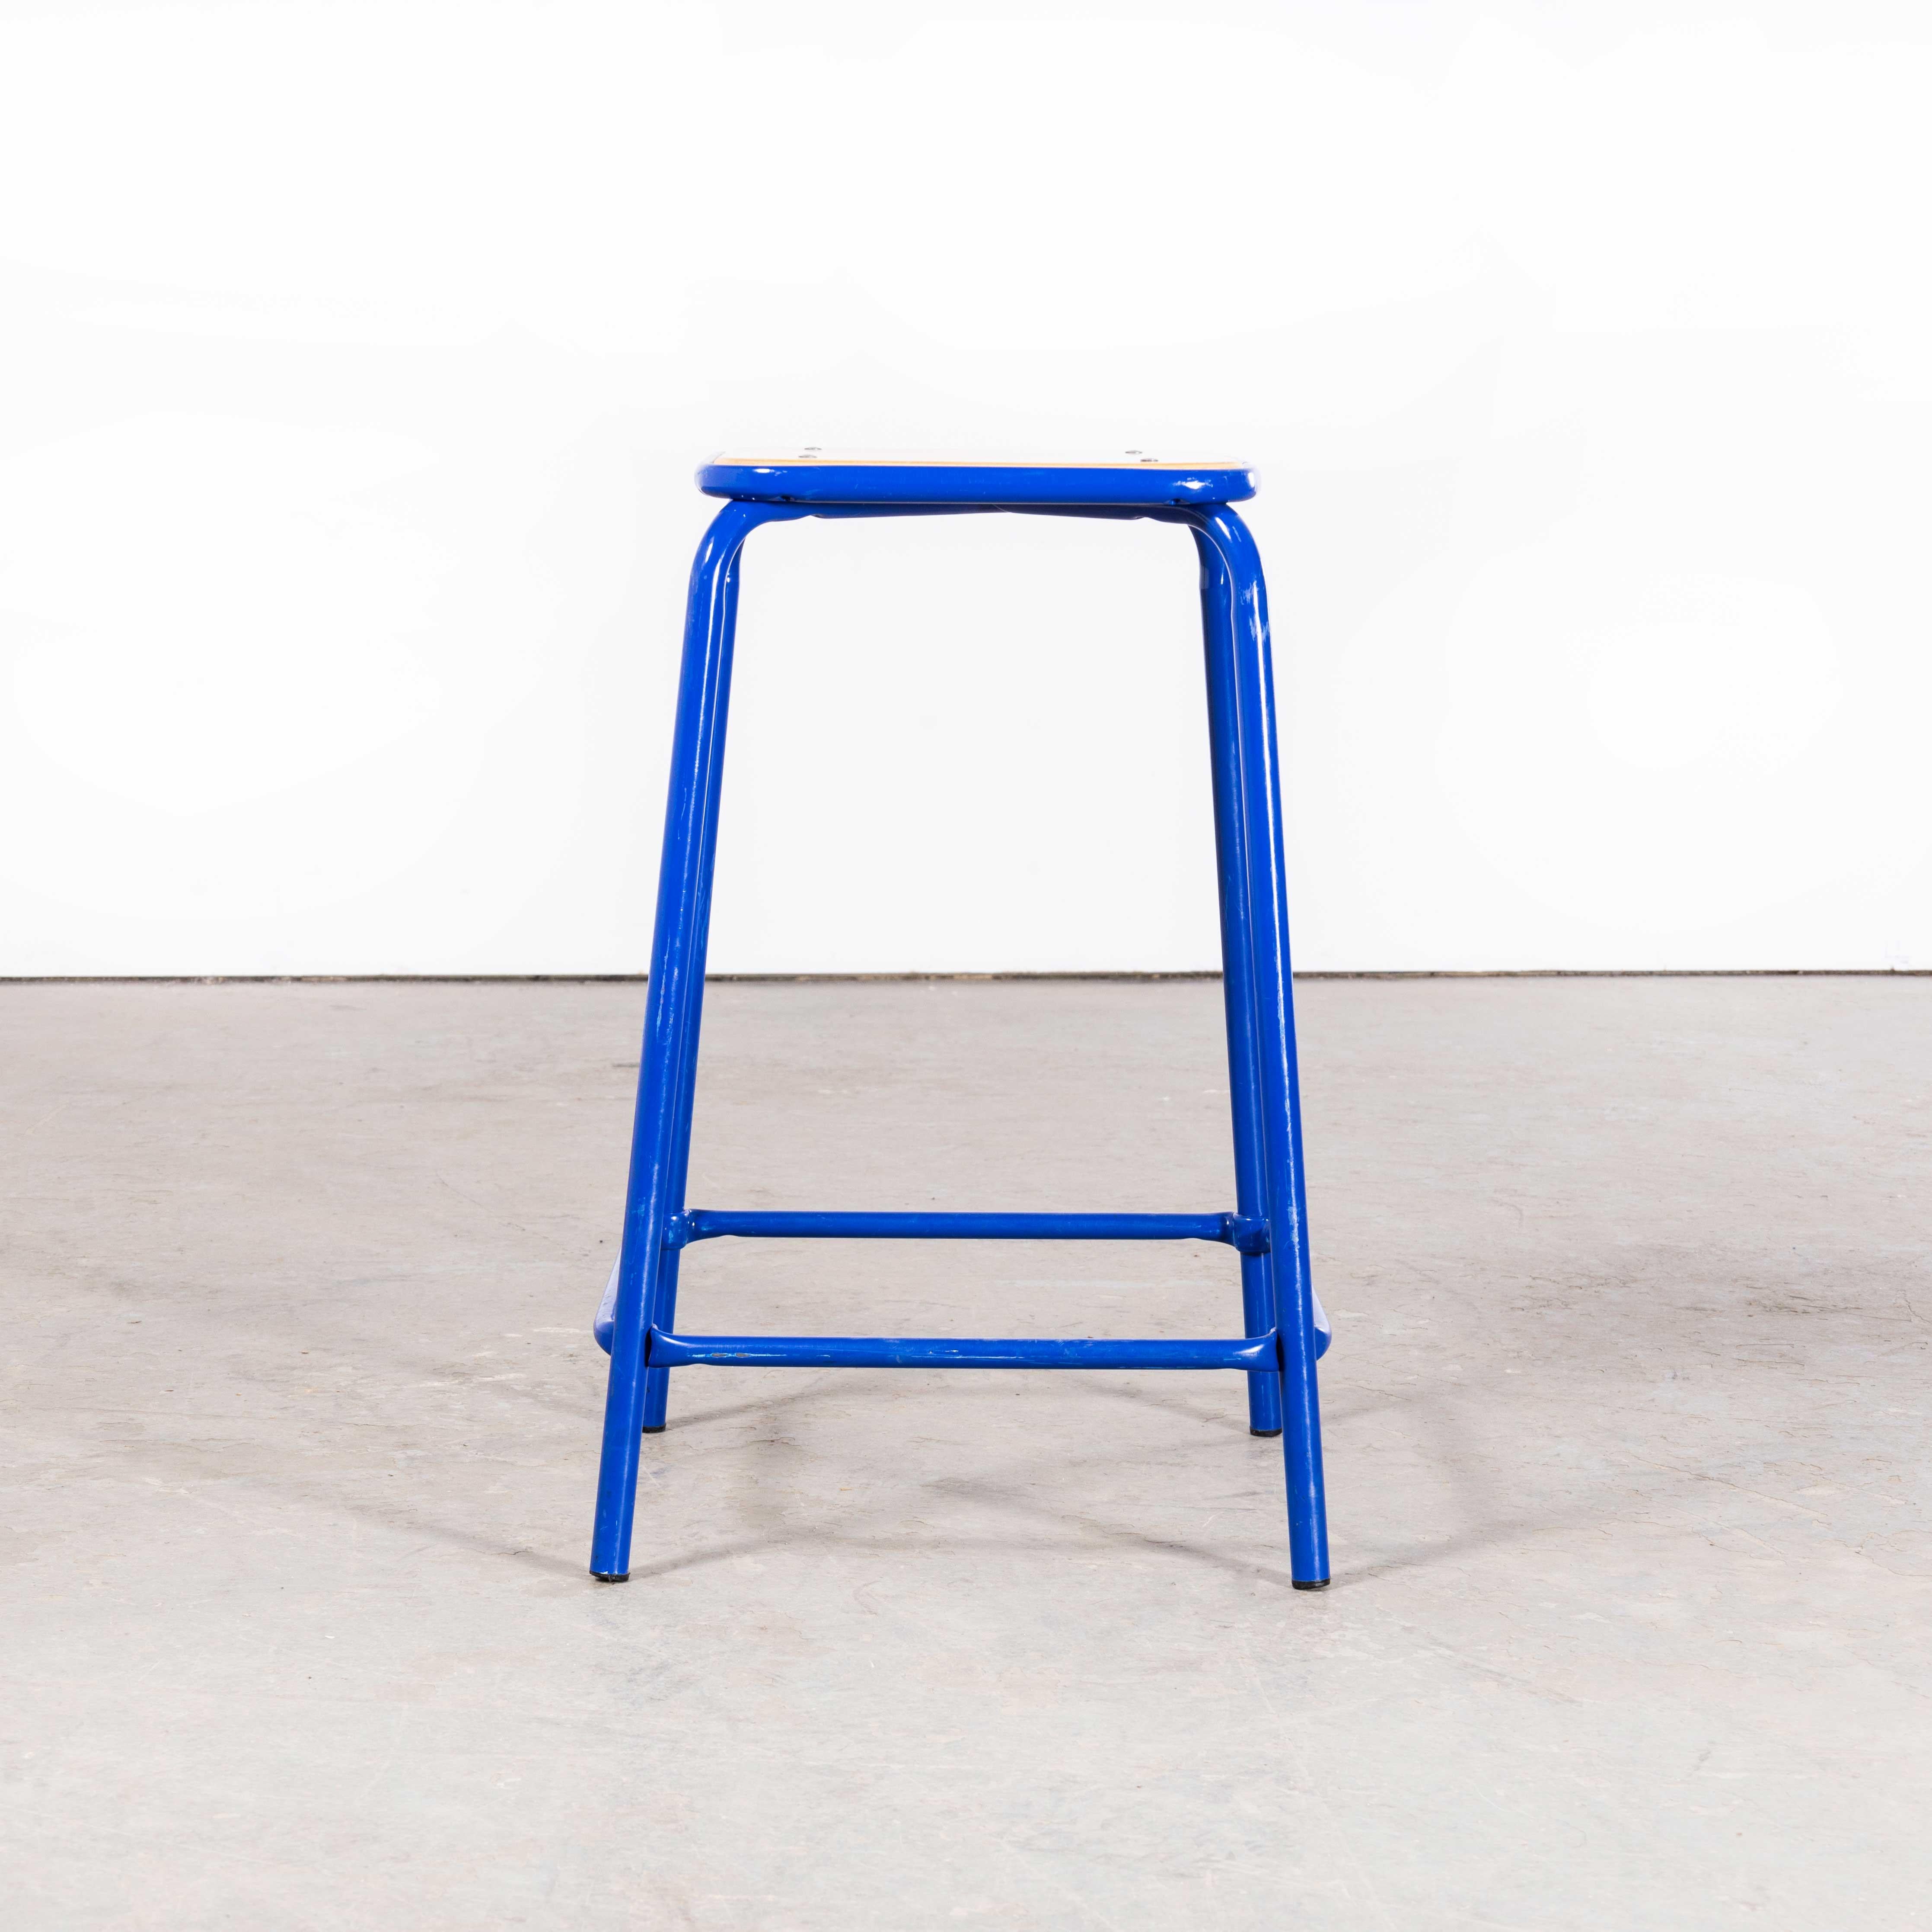 1970’s French Bright Blue Laboratory Stools – Set Of Six
1970’s French Bright Blue Laboratory Stools – Set Of Six. Good honest lab stools, heavy steel frames with solid heavy birch ply seats. We clean them and check all fixings, they are good to go.